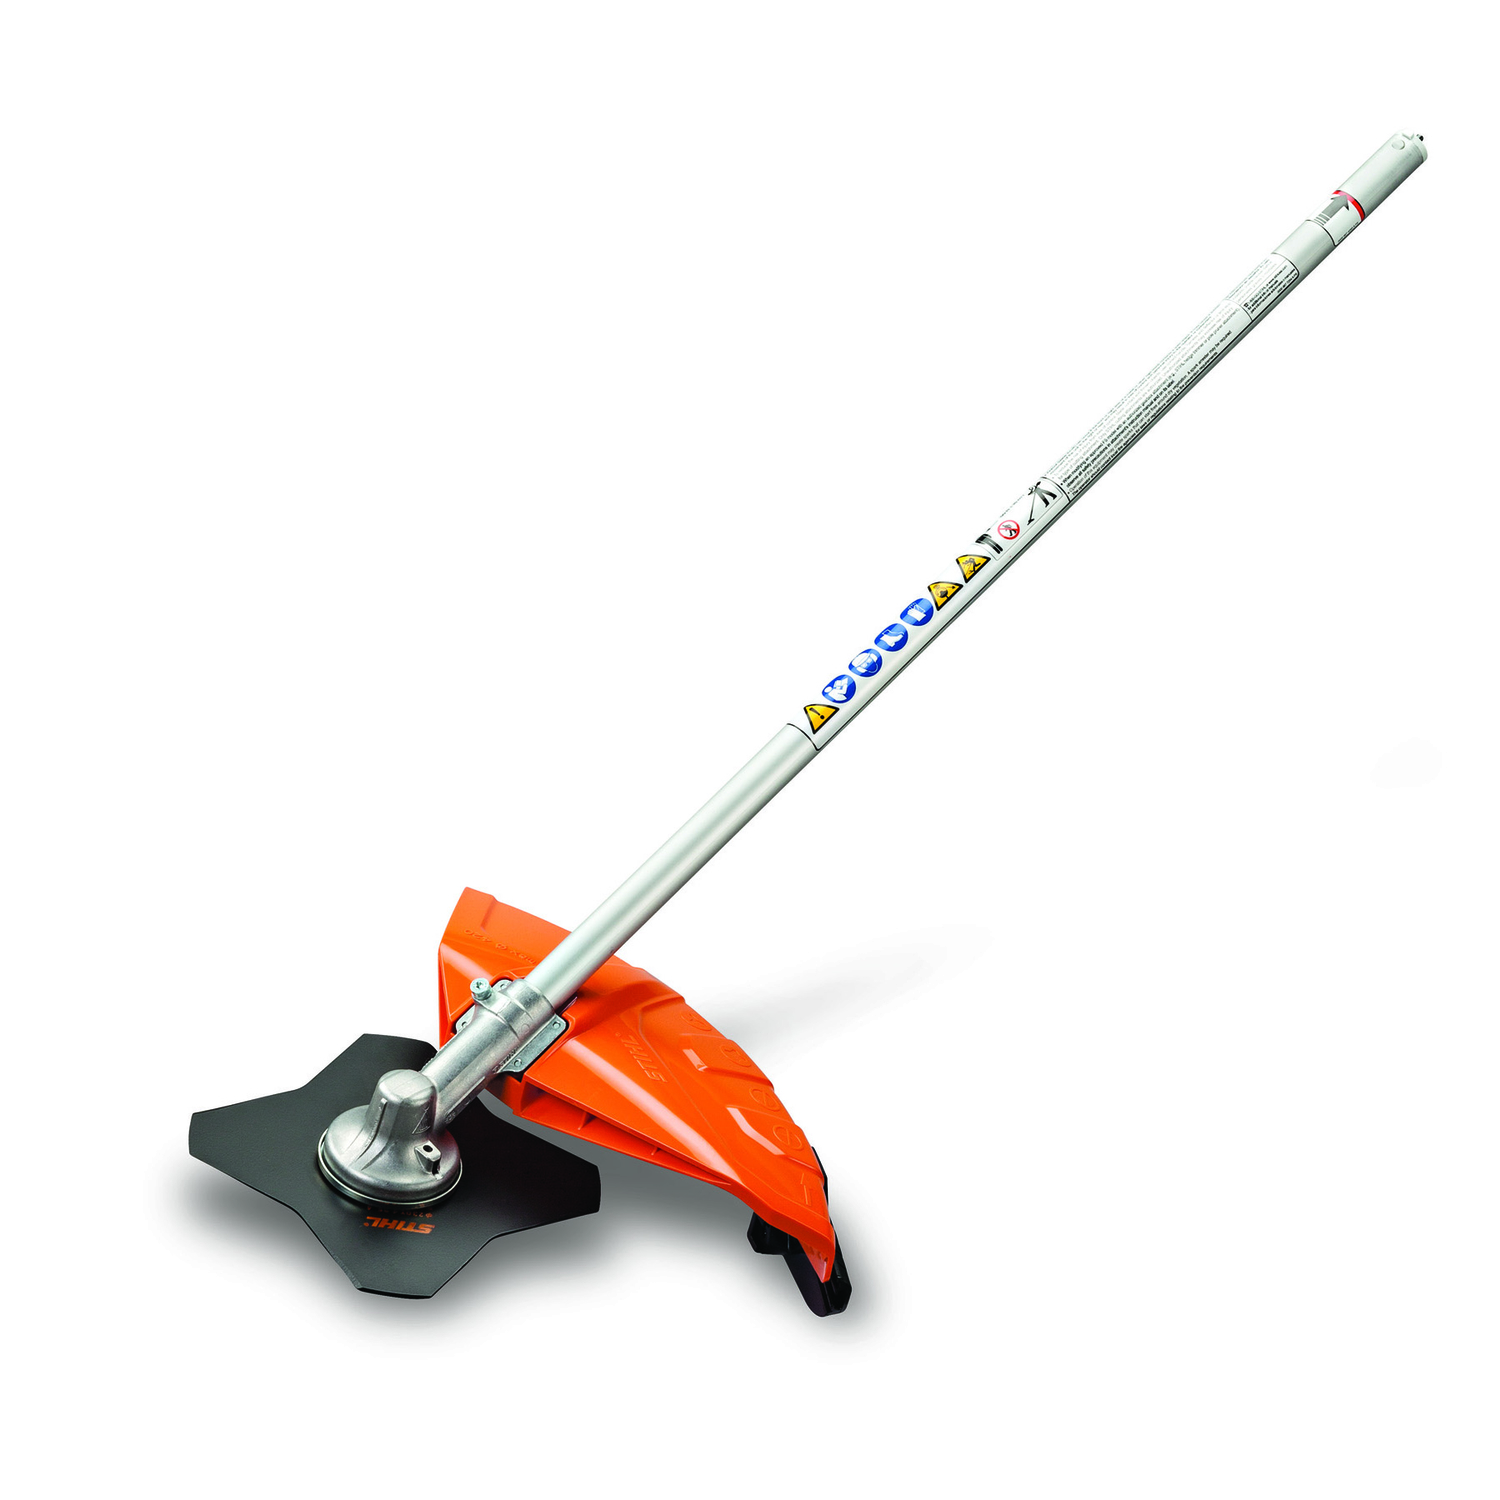 stihl weed eater for sale ace hardware